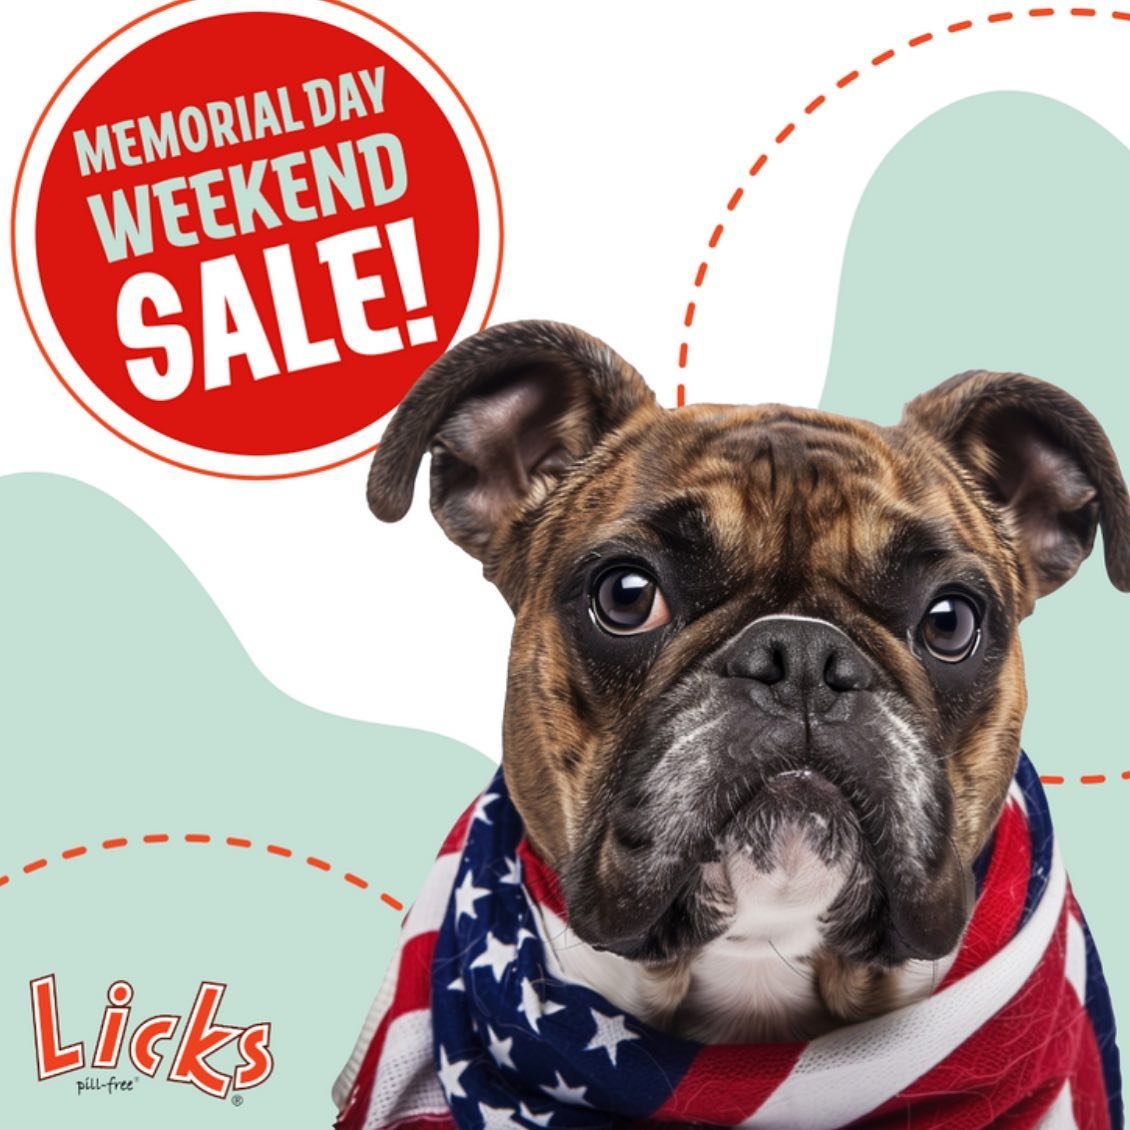 LICKS Memorial Day Weekend Sale is HERE! 
Save $15 on all orders over $50 with code:
MEMORIAL24